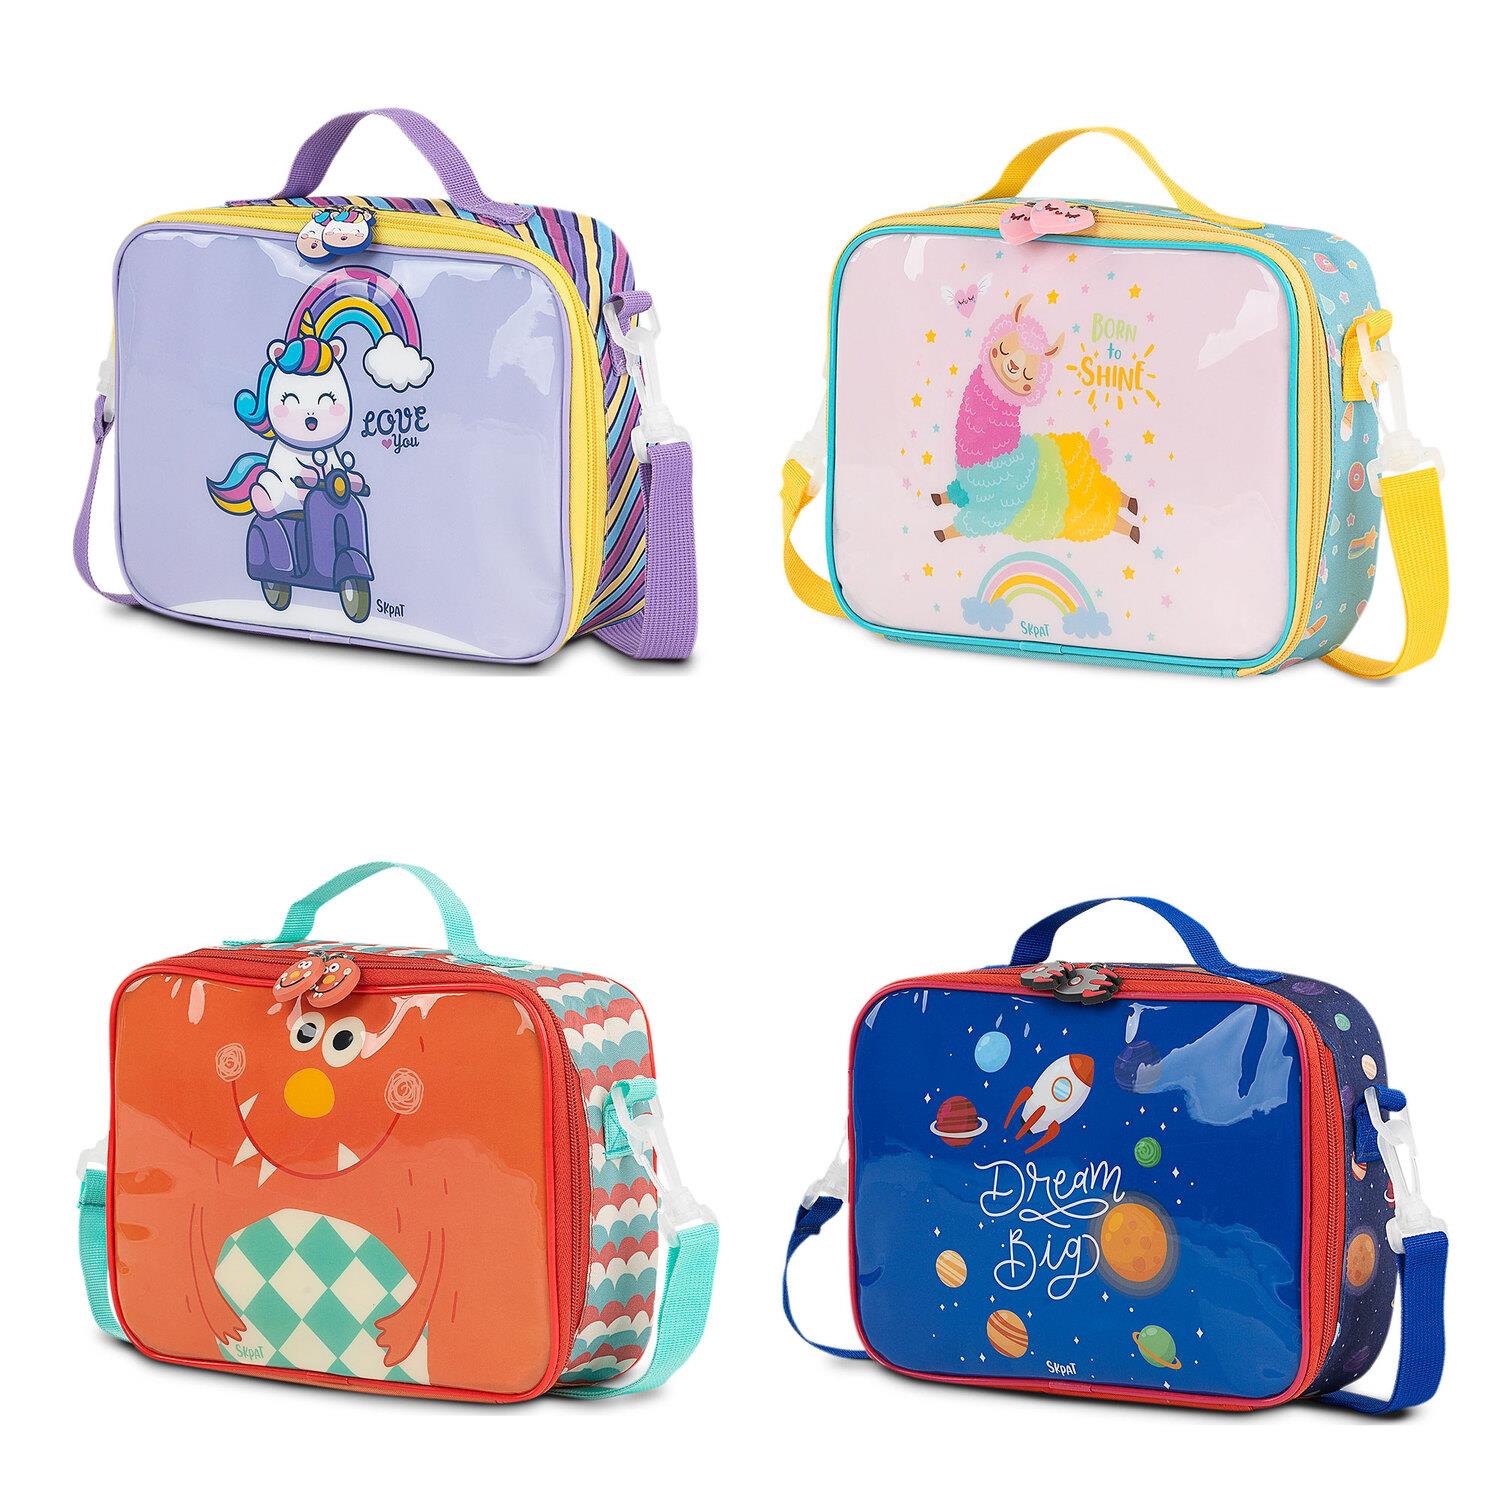 PACK4 BOLSA ISOTERMICA BABY